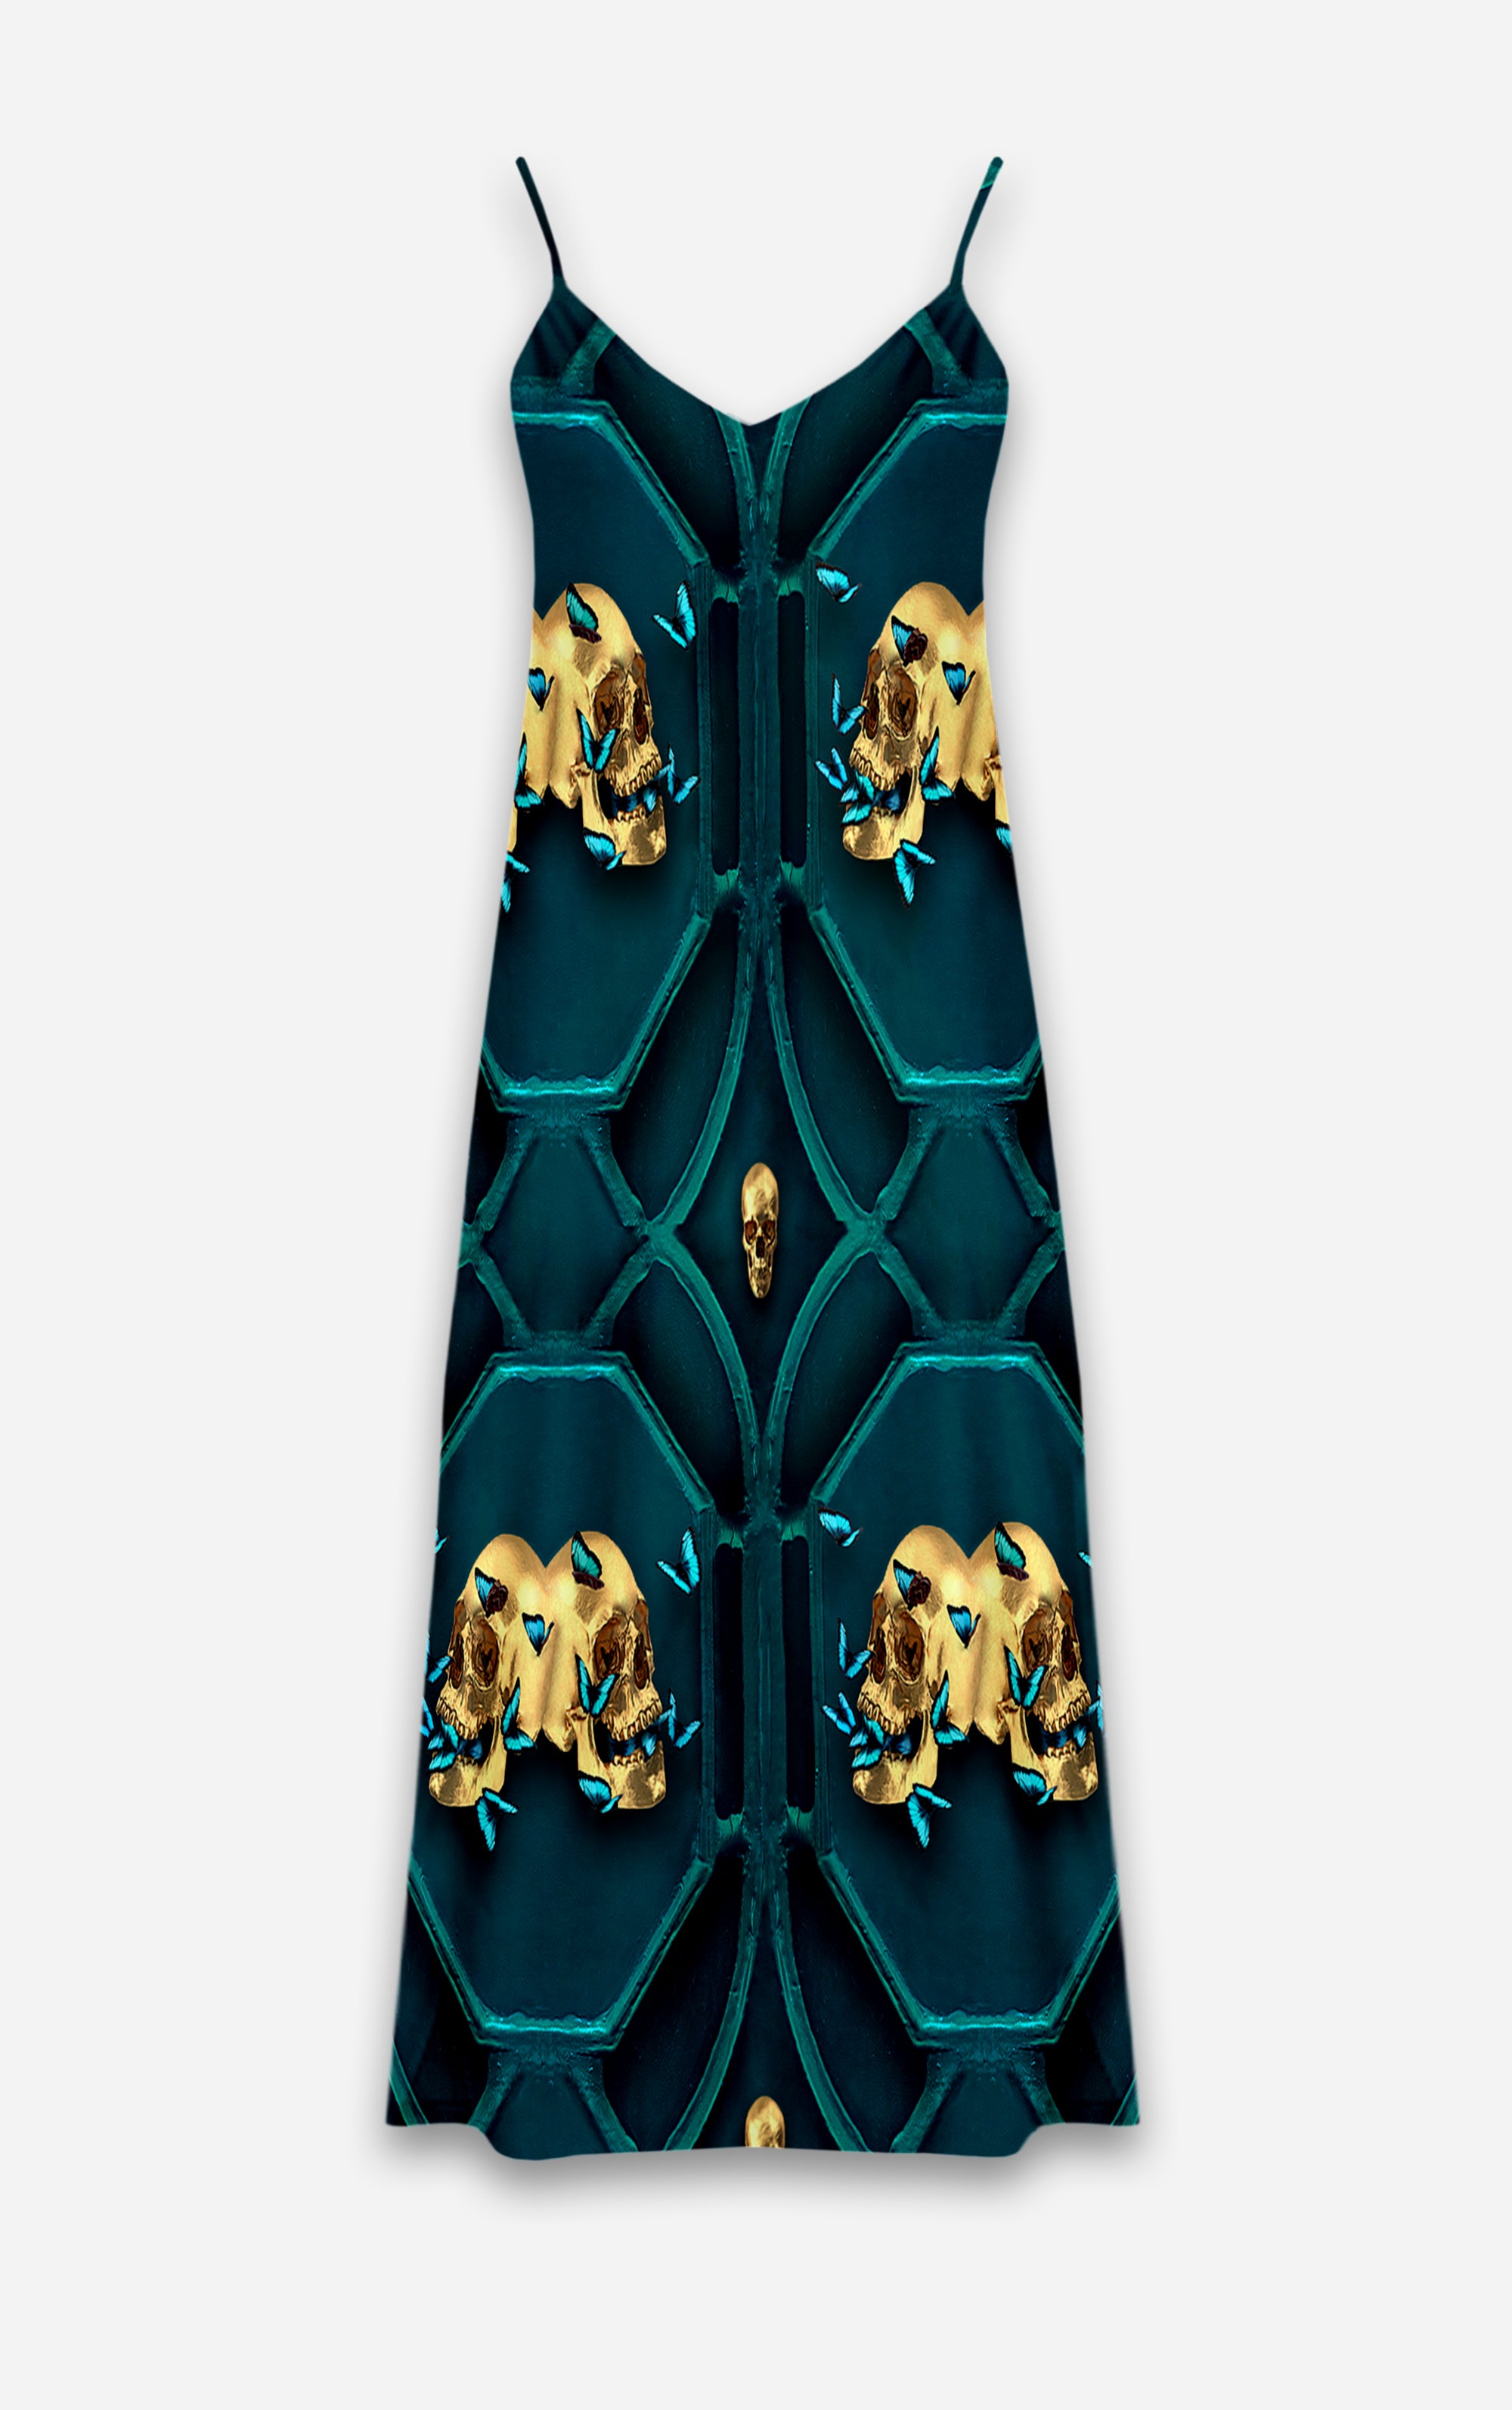 All Saints Double Nouveau- 100% Silk Satin French Gothic V Neck Slip Dress in Midnight Teal | Le Leanian™